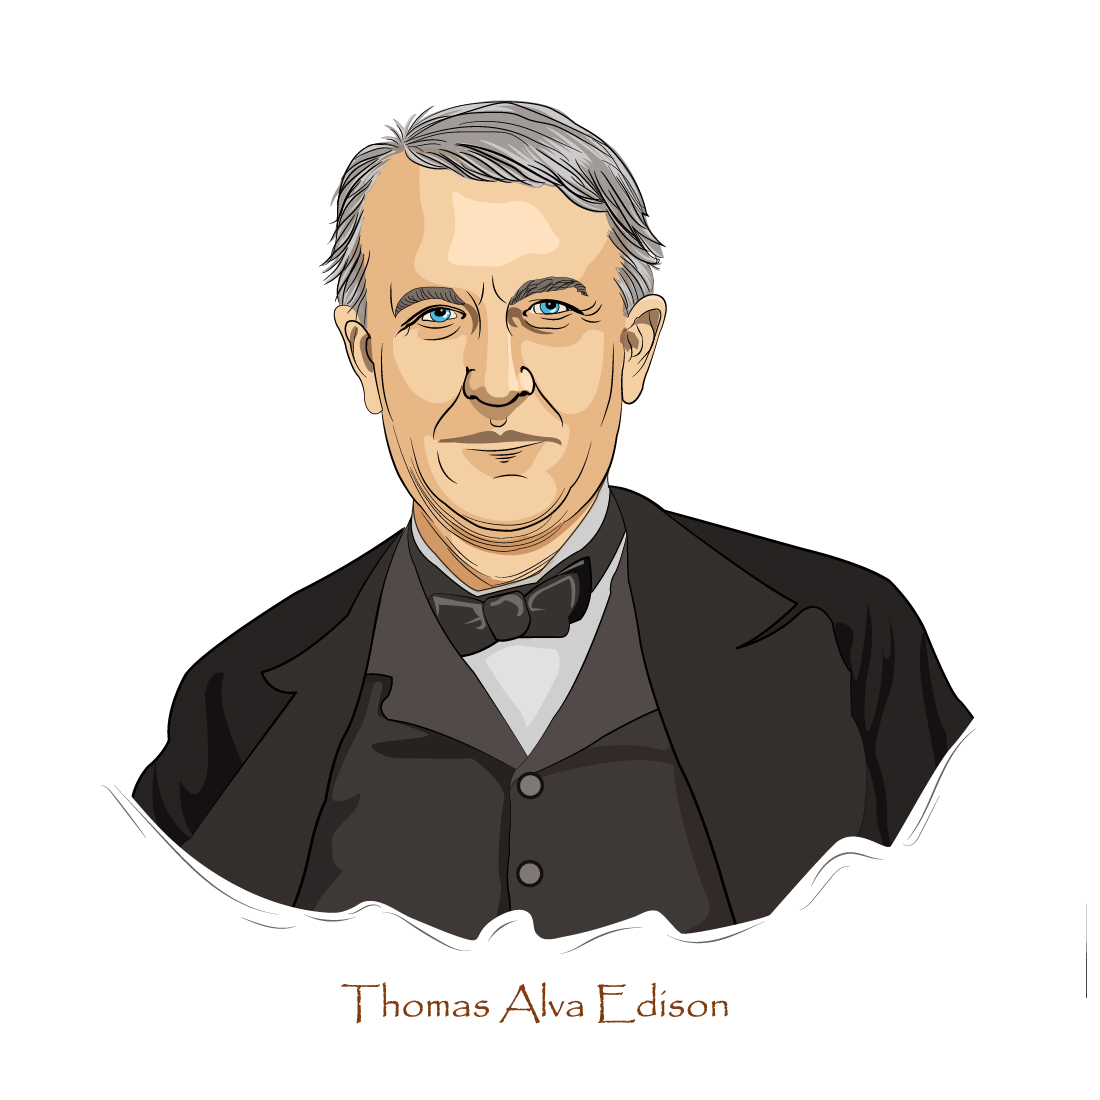 Thomas Alva Edison was an American inventor invented the phonograph, motion picture camera, and electric light bulb preview image.